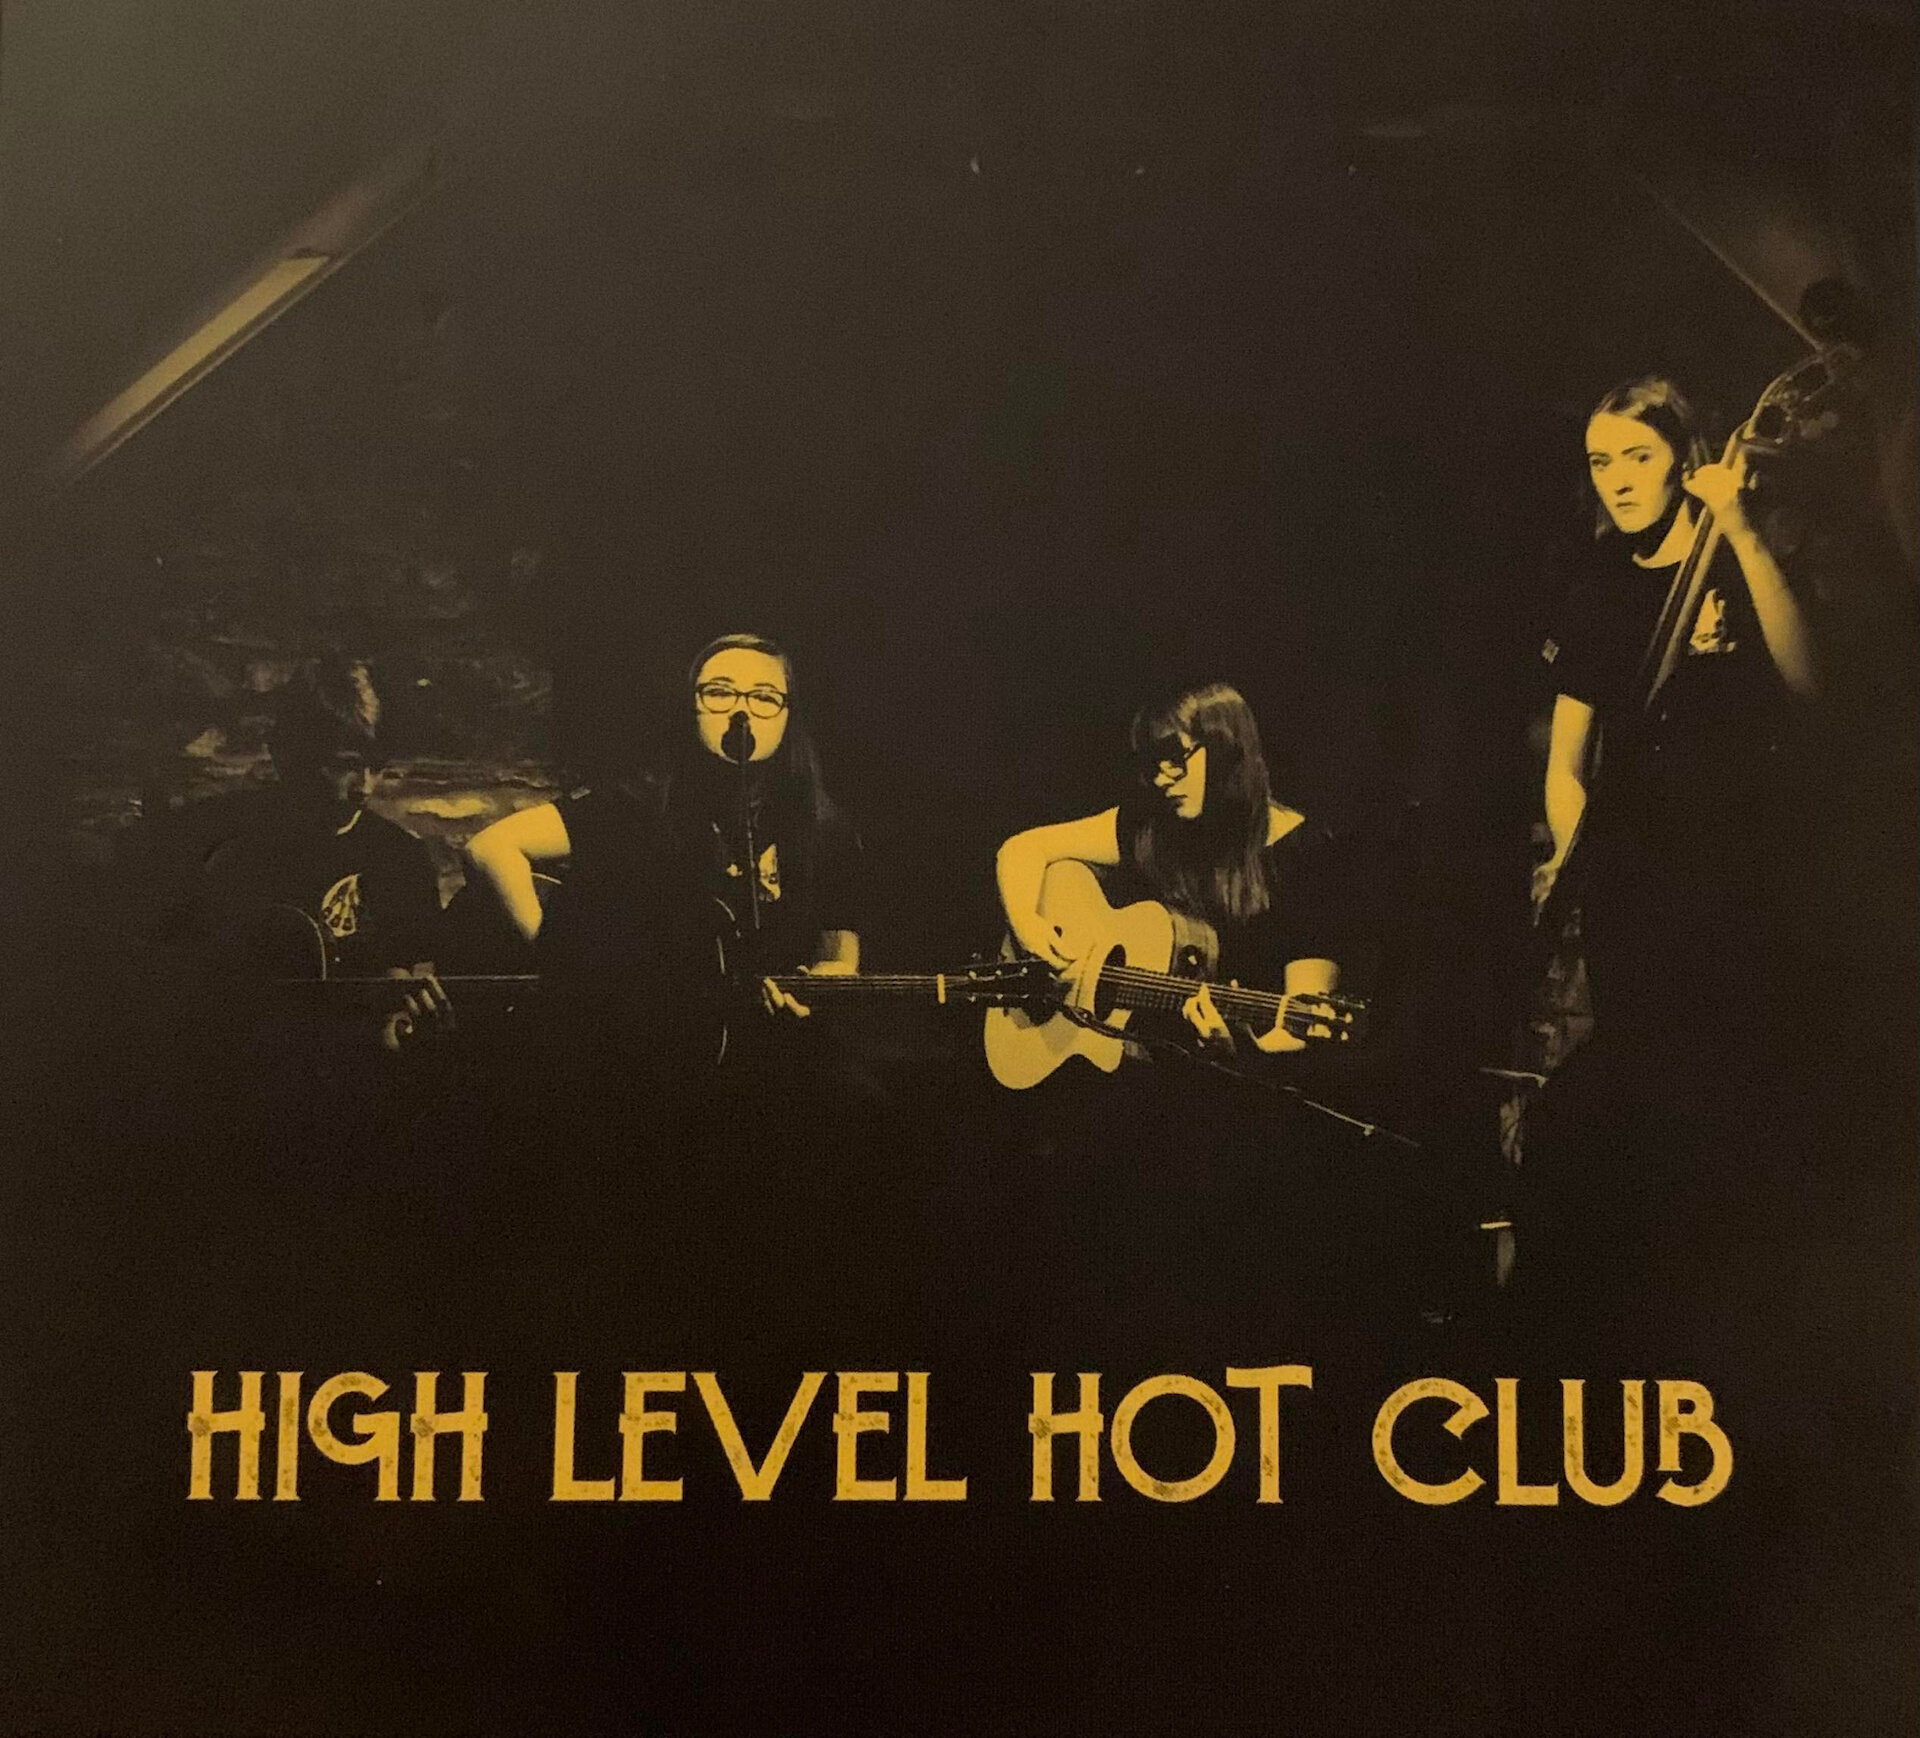 High Level Hot Club's 10-track debut CD was released in late 2022.